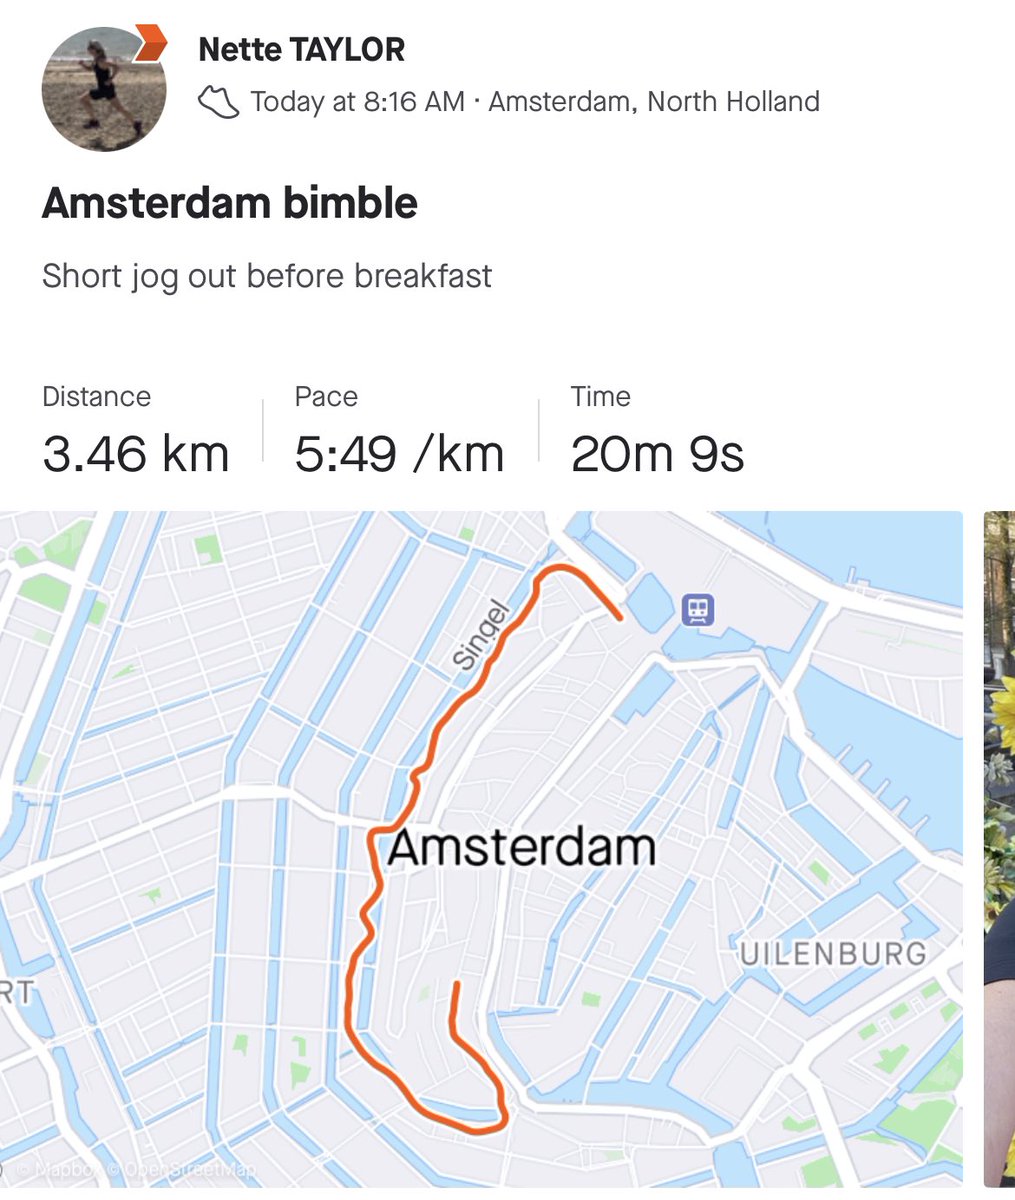 A morning trot to stretch the legs in preparation for seeing @NBThieves in #Amsterdam this evening 🎤 #ukrunchat #running #GoodFriday #holidayrun